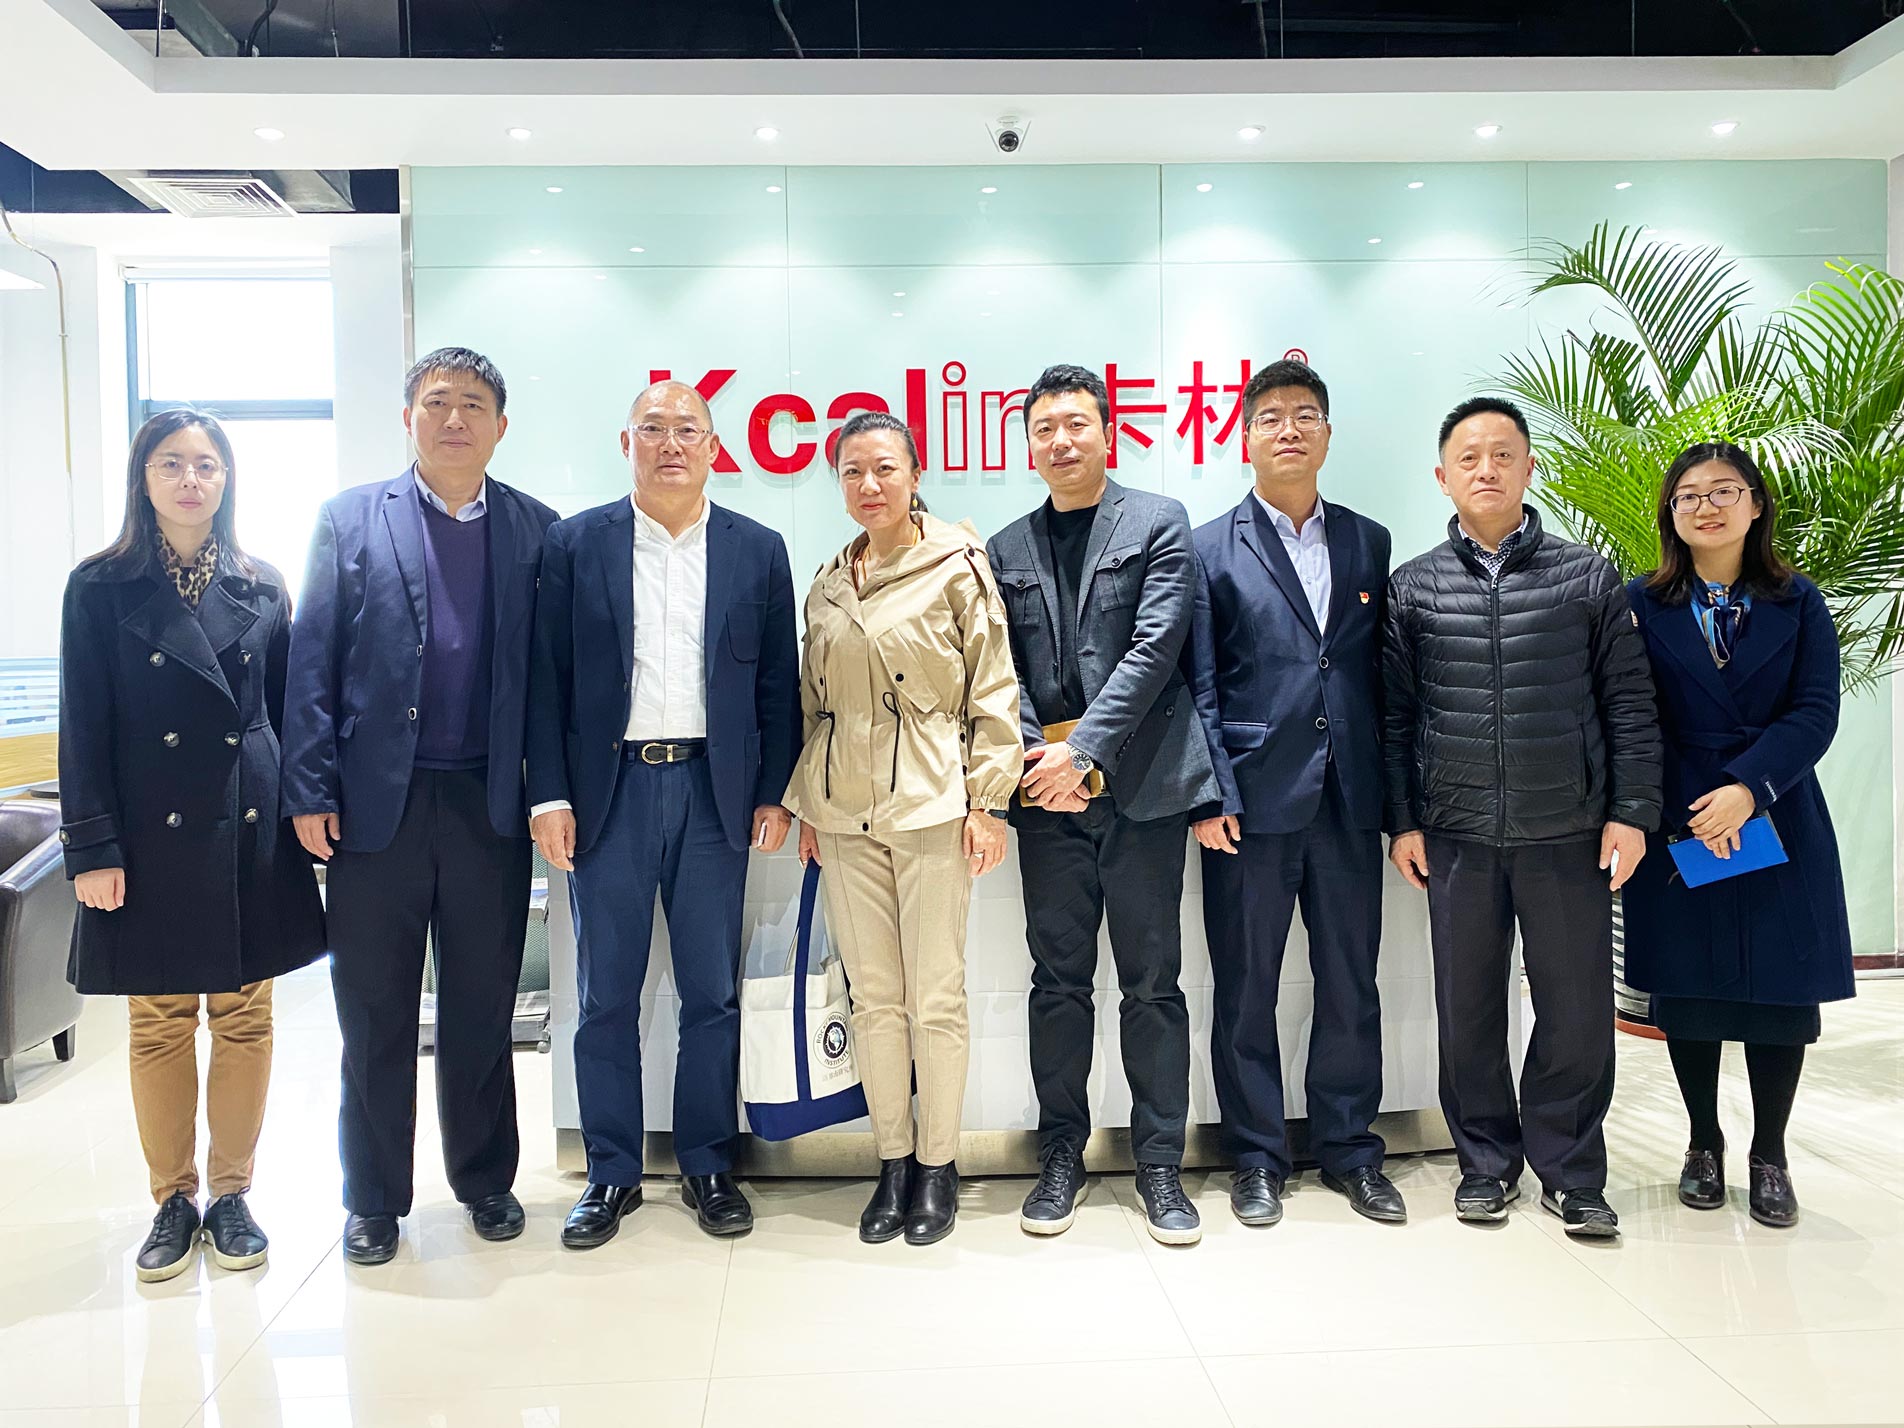 Xinyuan Science Park visited Kcalin